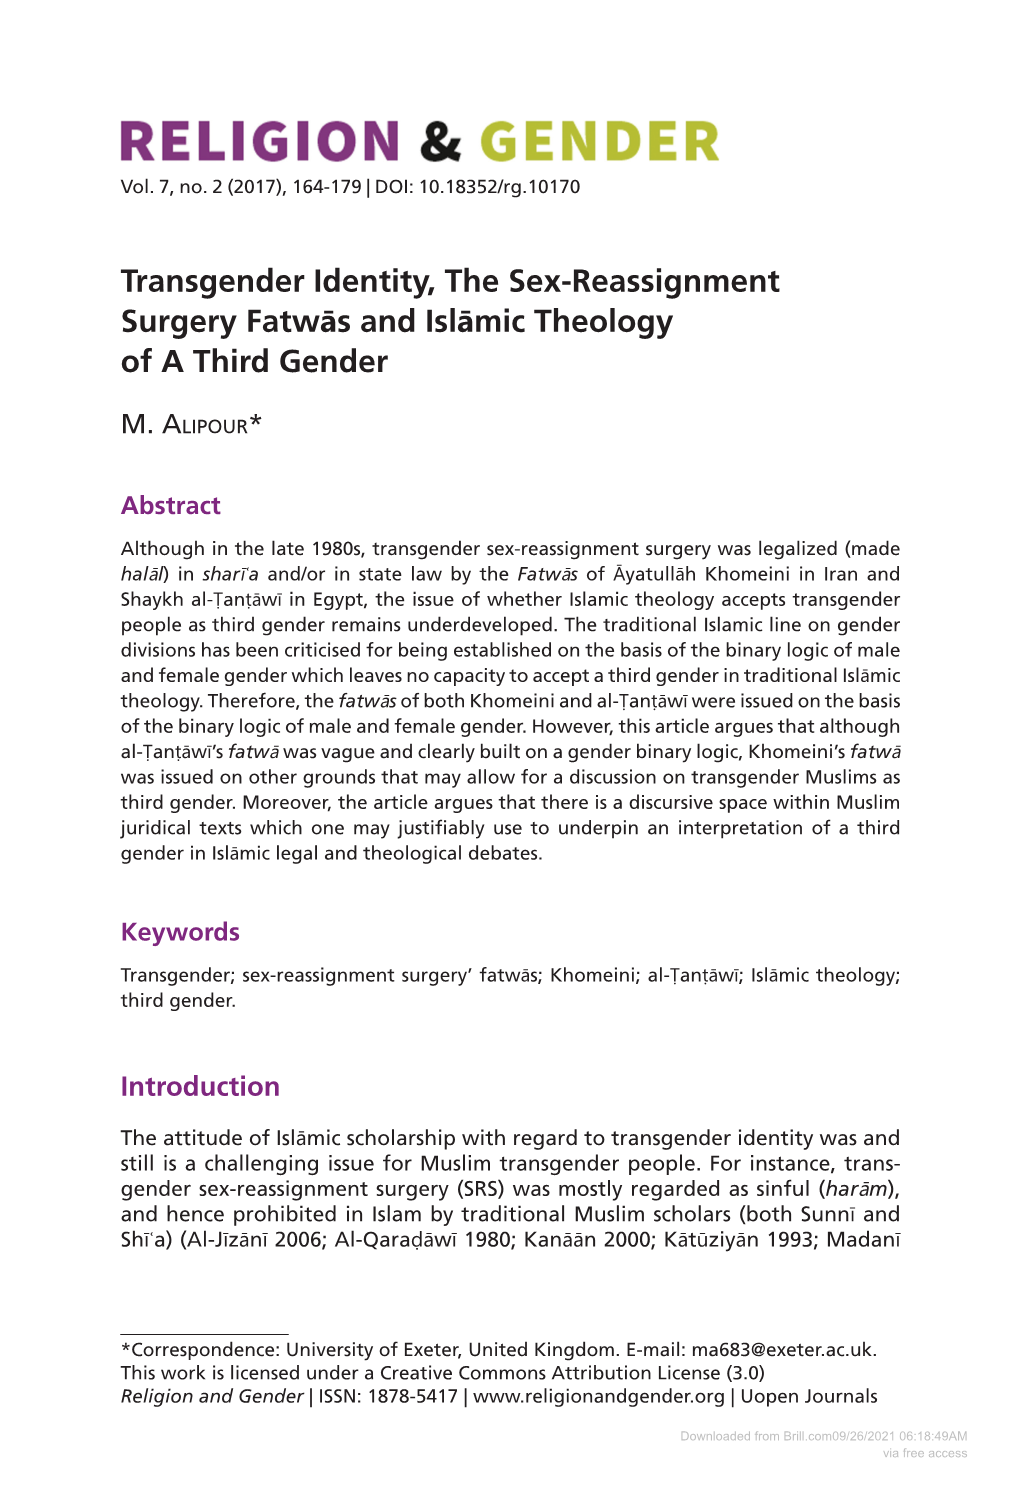 Transgender Identity, the Sex-Reassignment Surgery Fatwās and Islāmic Theology of a Third Gender